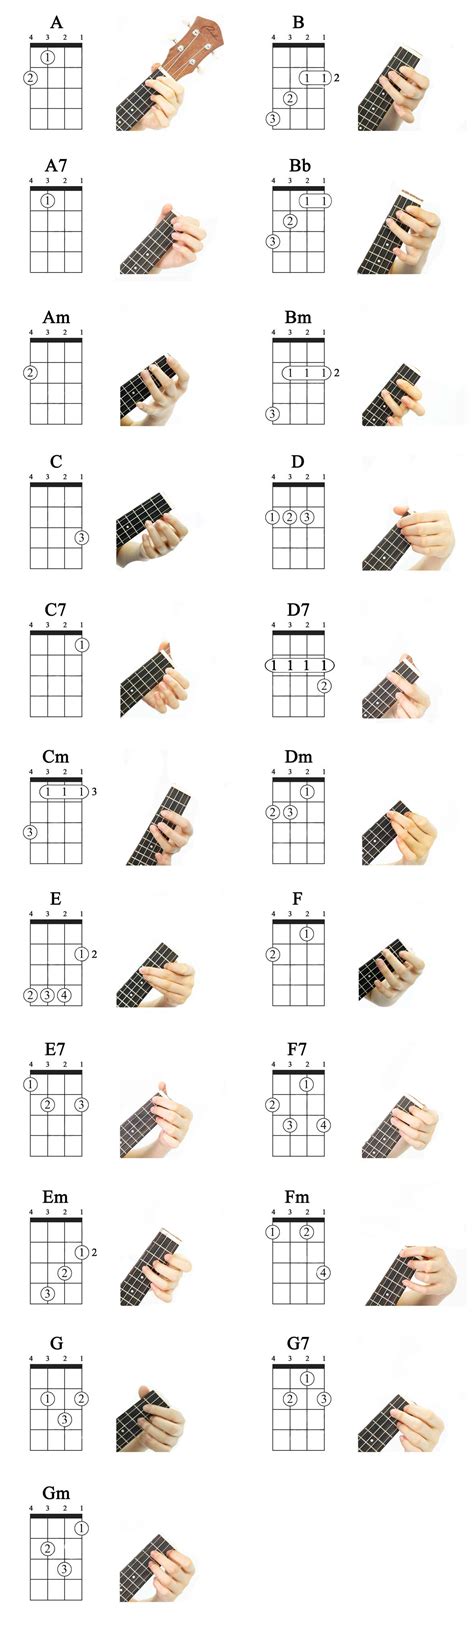 We have mentioned 13 easy 2 chord ukulele songs with video songs, artist's name, album's name, released date, genres, chord charts, and video tutorials. Ukulele: Basic 21 Ukulele Chords For Beginning Players